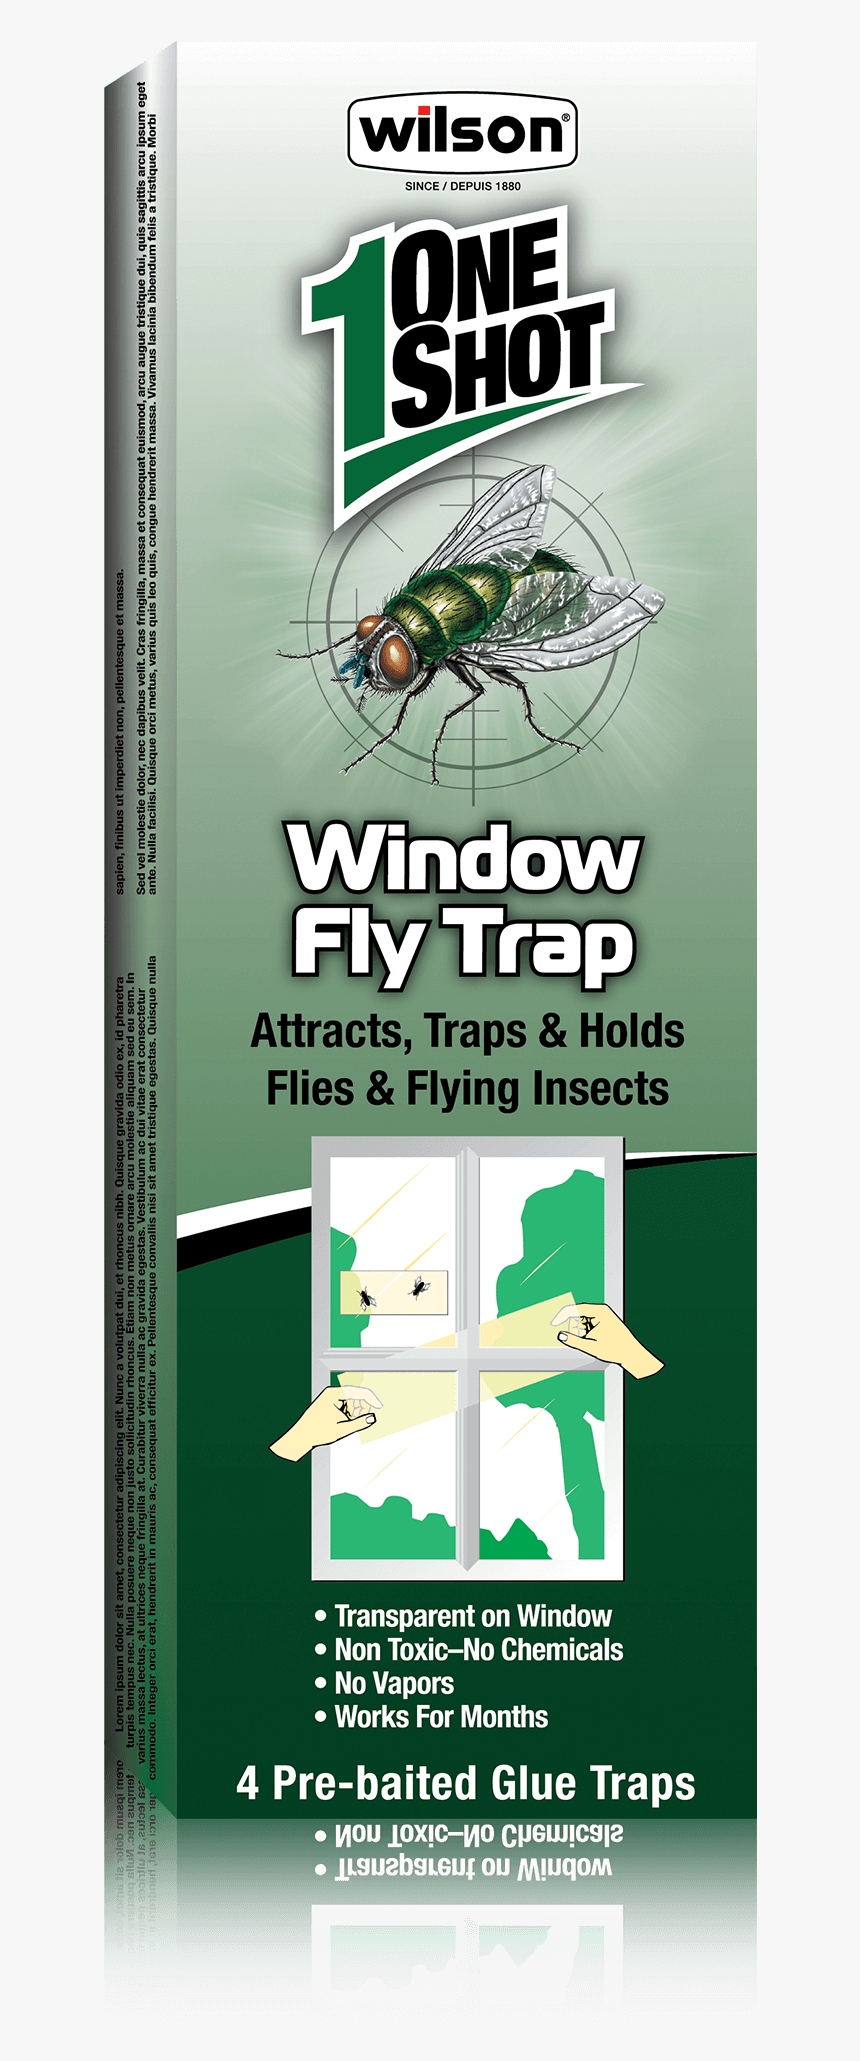 Wilson One Shot Window Fly Trap - Hornet, HD Png Download, Free Download